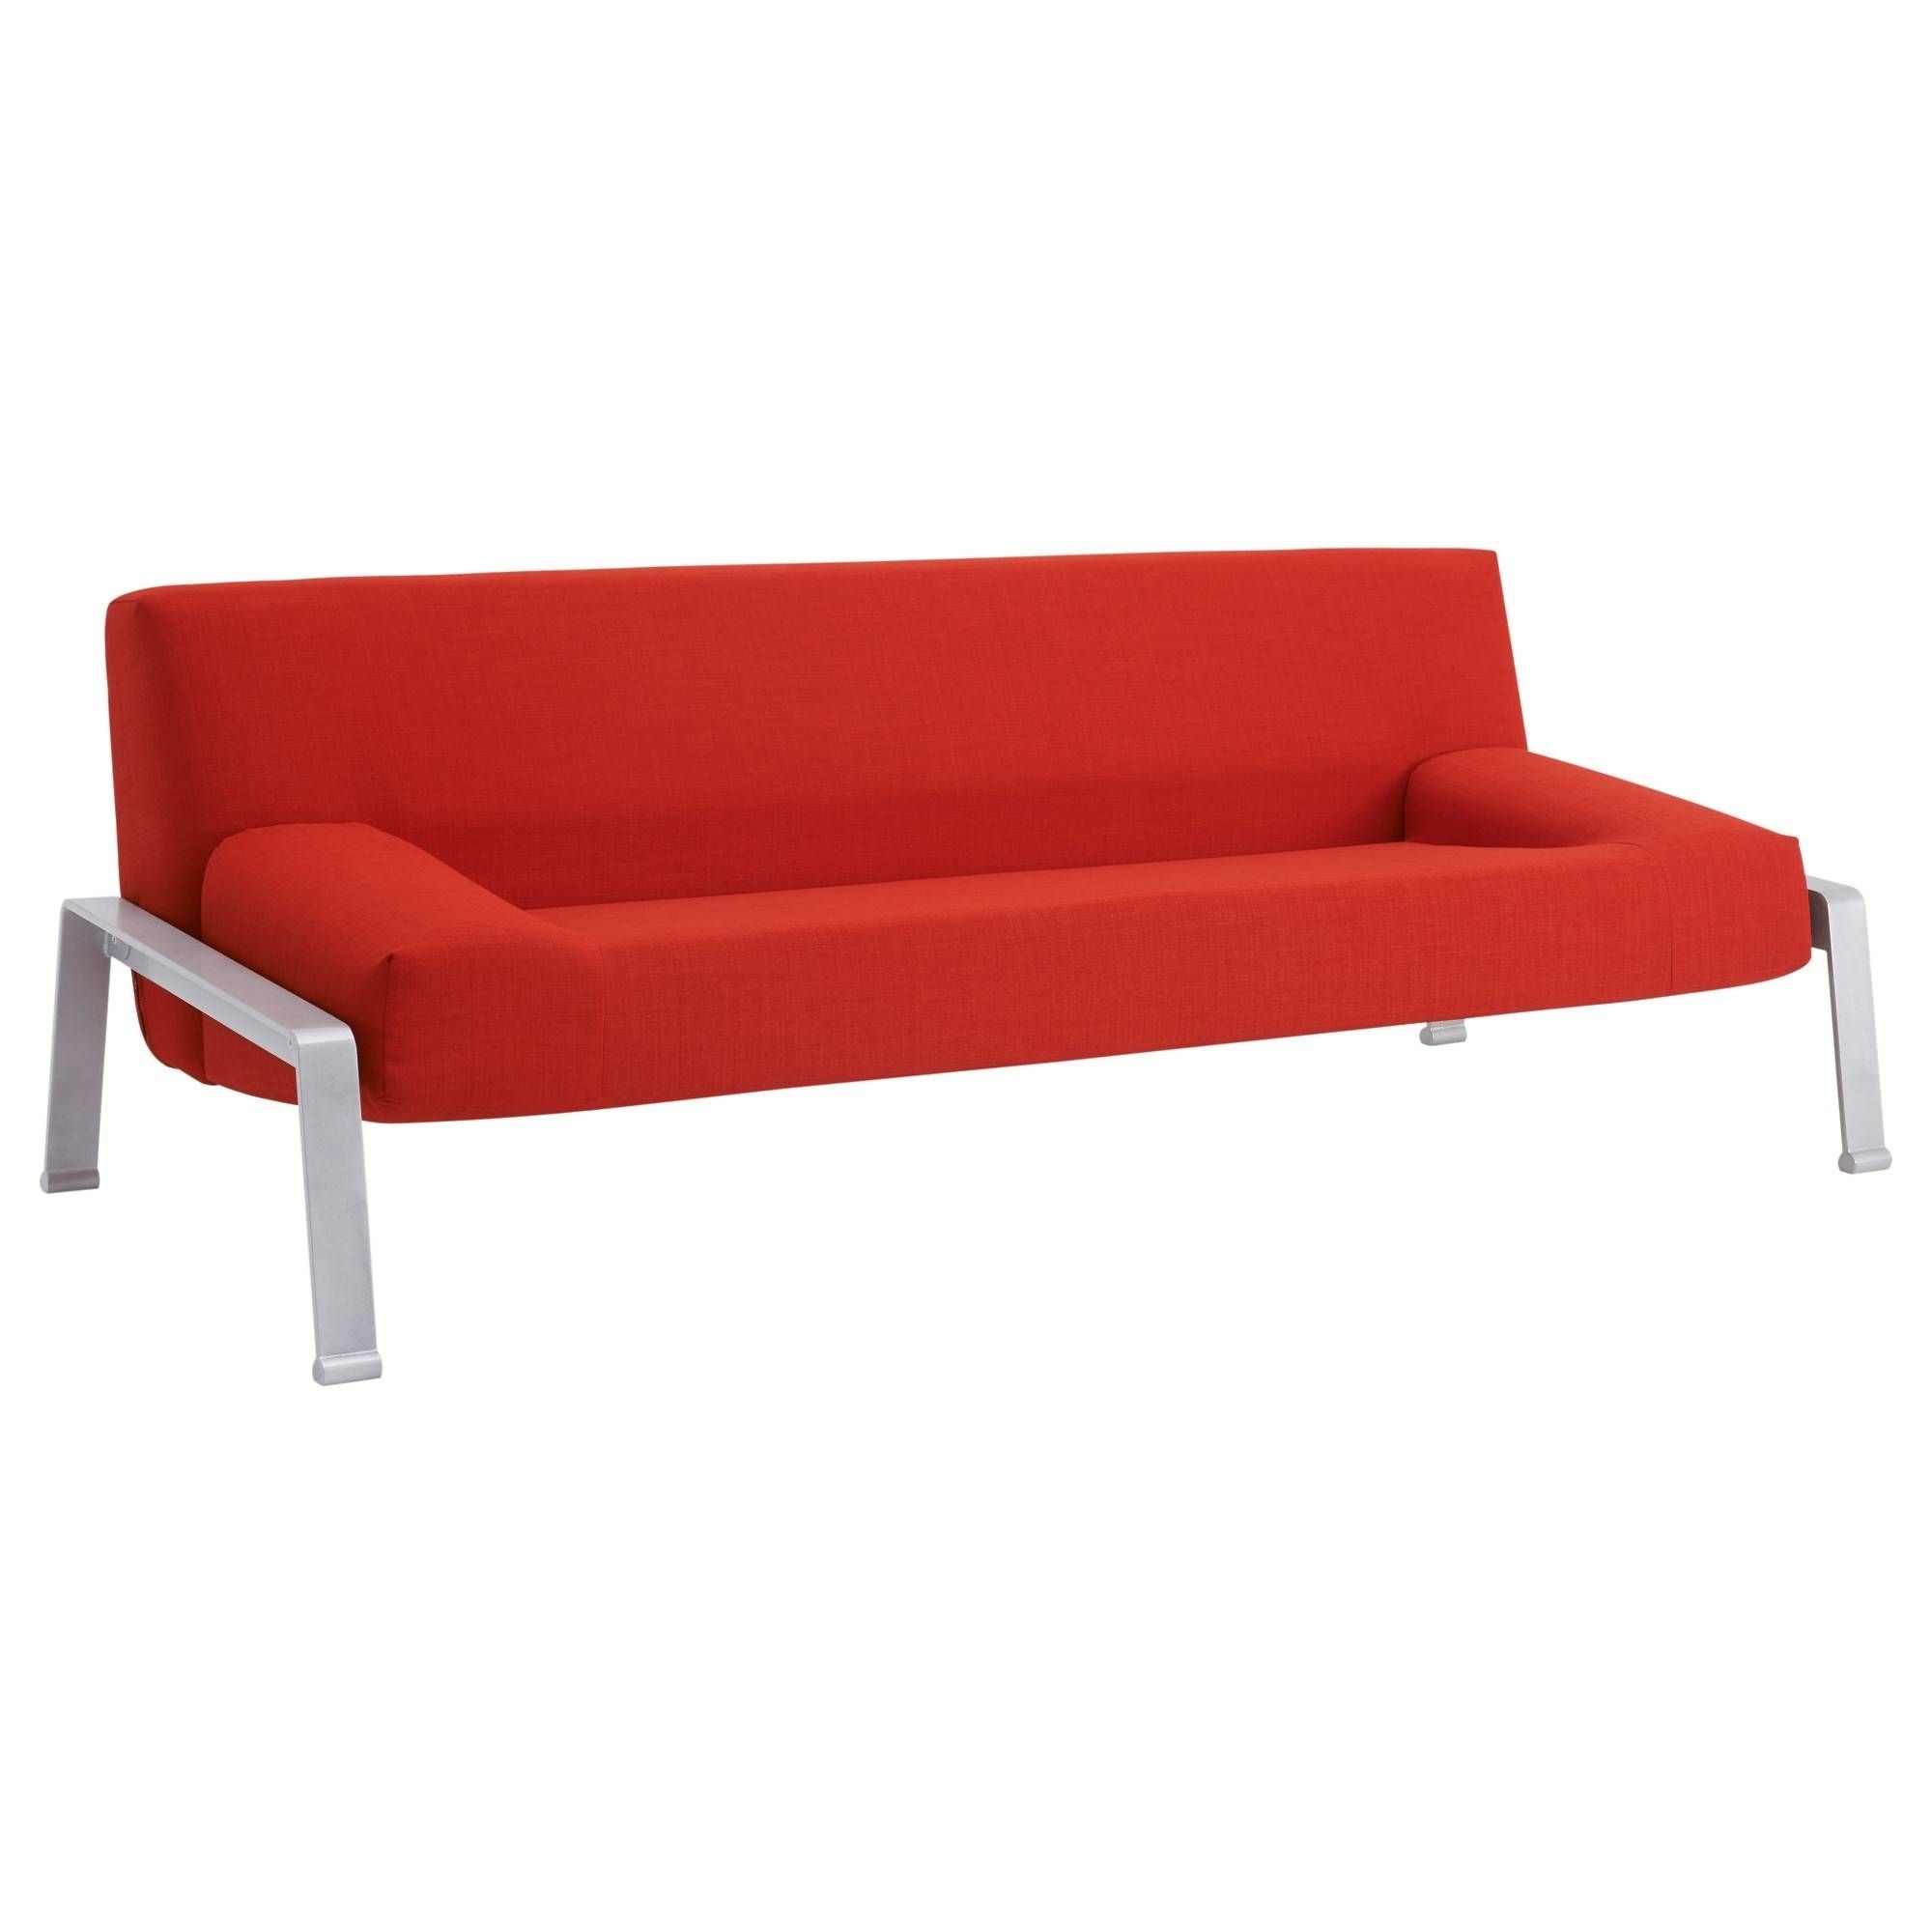 Furniture: Fancy Sleeper Sofa Ikea For Your Best Living Room Intended For Red Sofa Beds Ikea (View 30 of 30)